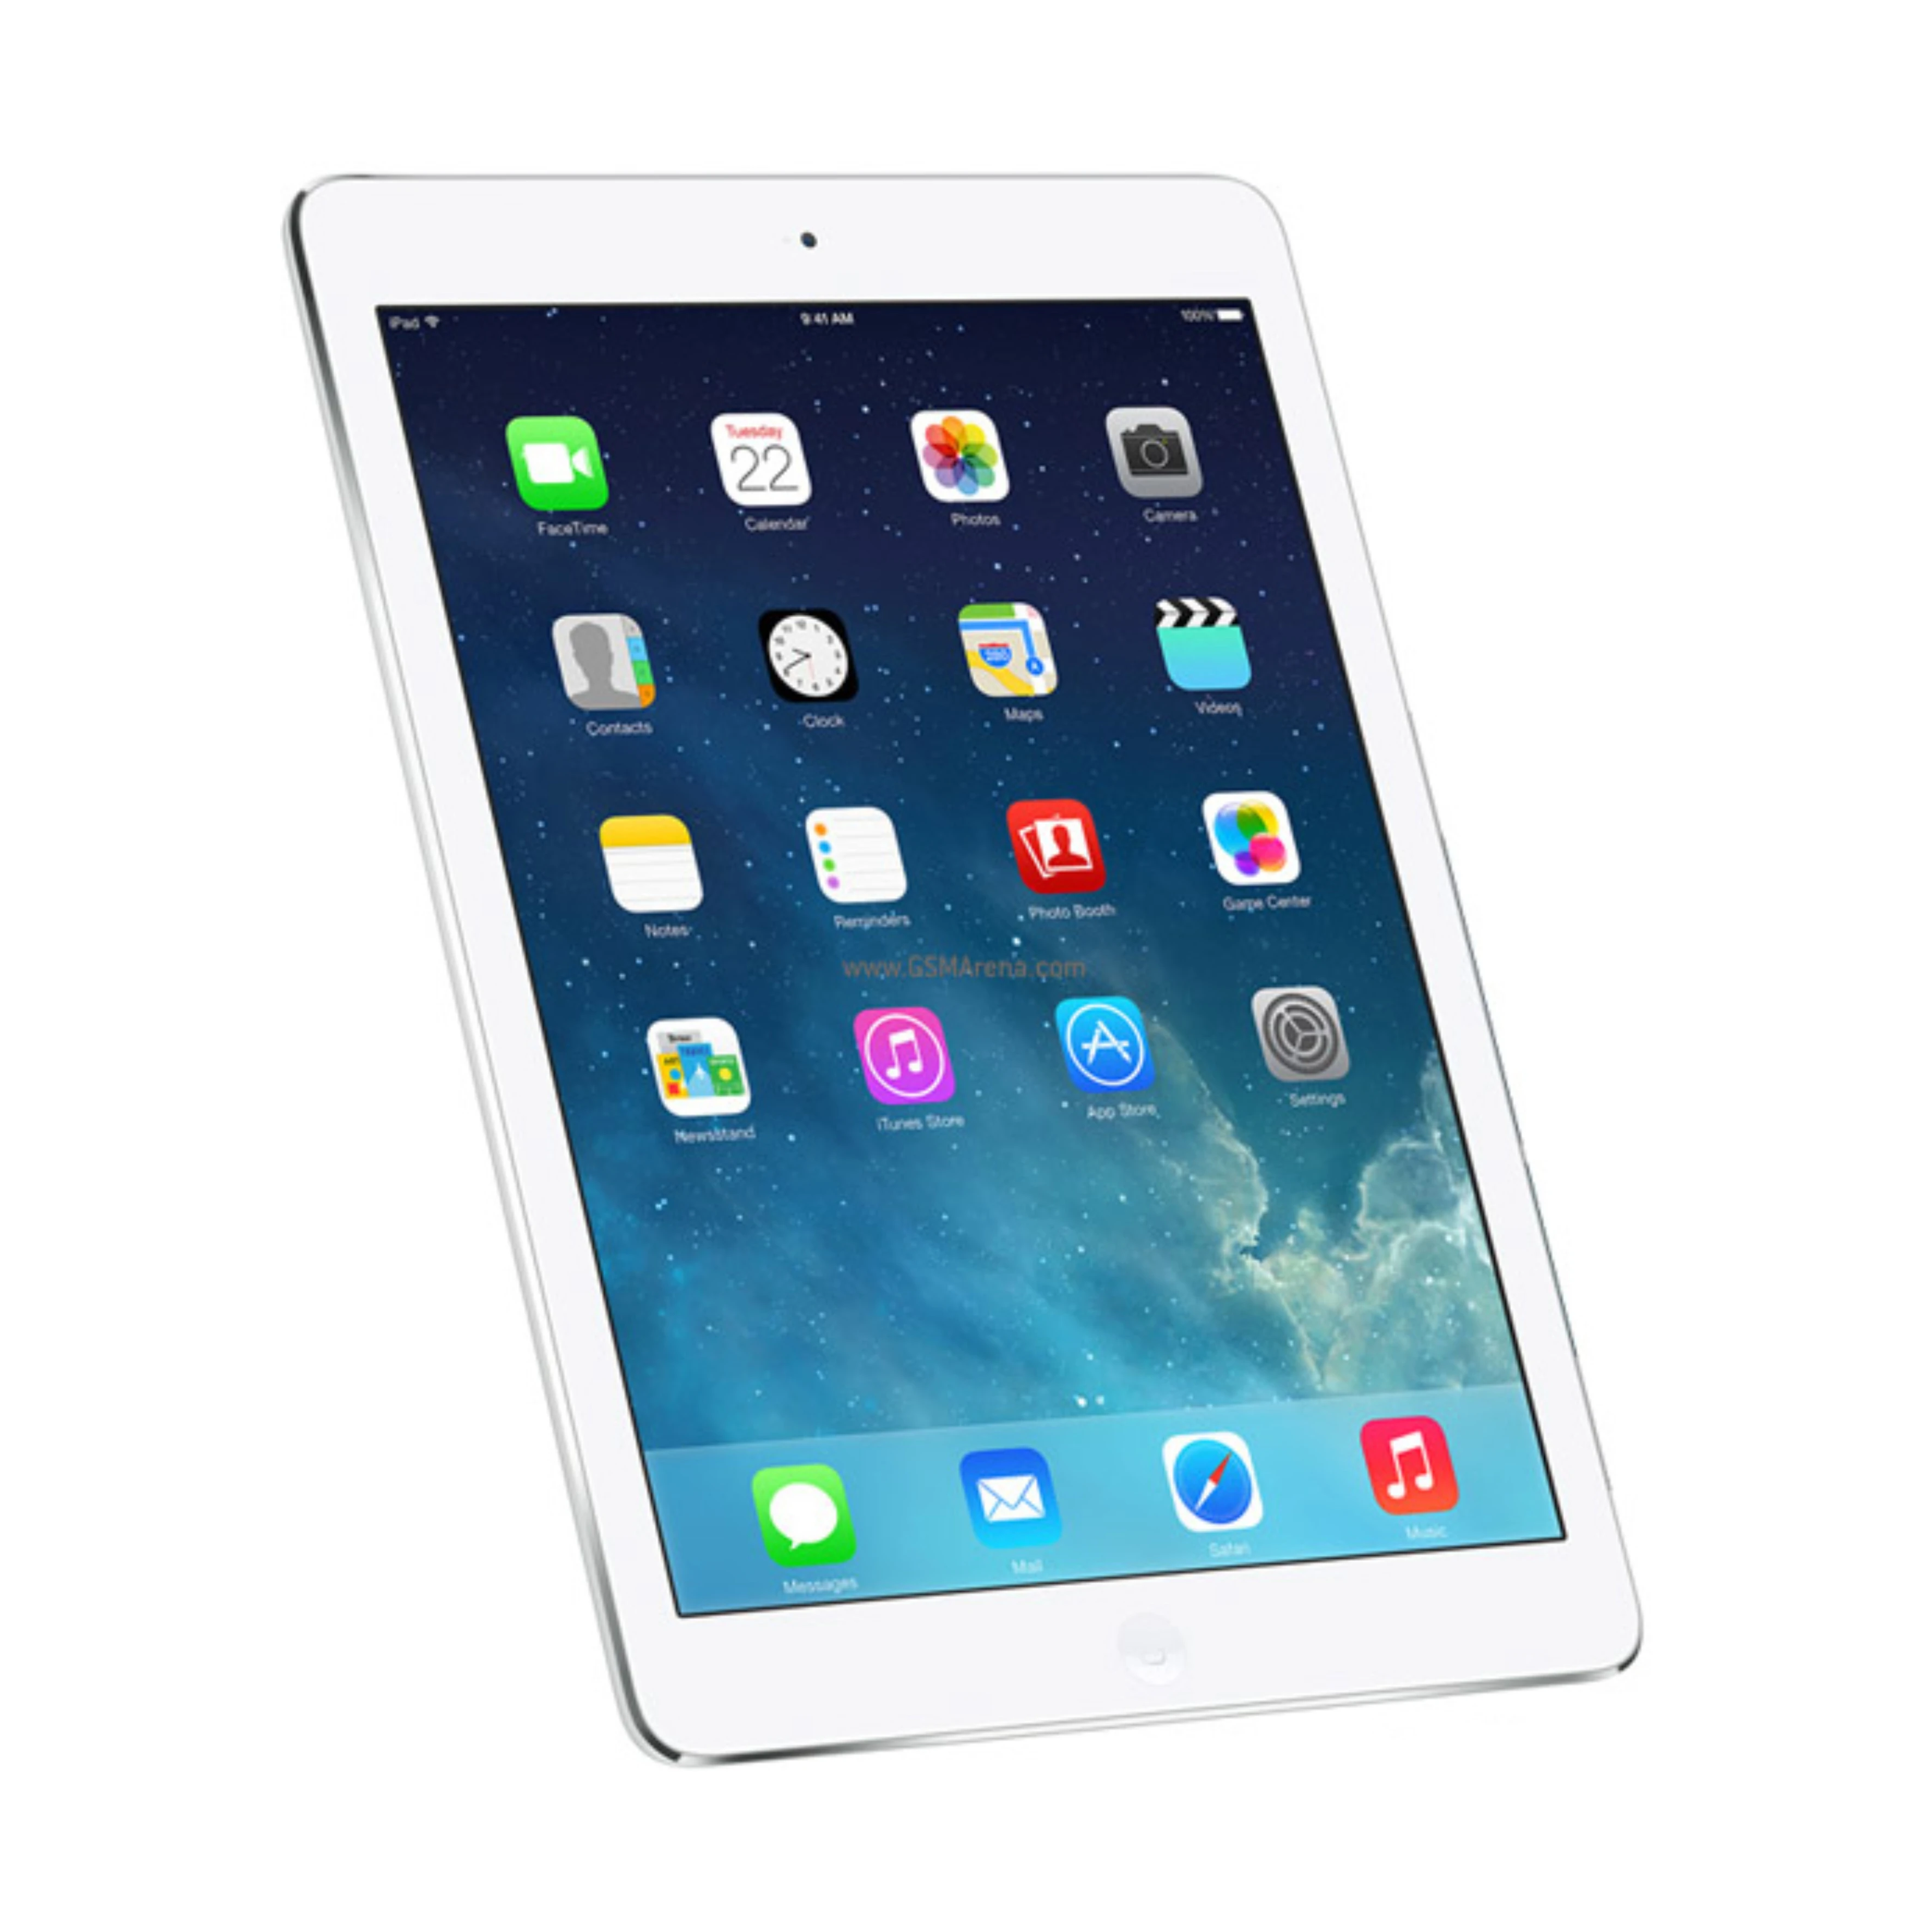 

Online Hot Sale 16GB WIFI Tablet PC 2013 iPad Air 1st Generation For Apple 9.7 Inch iPad Air Original